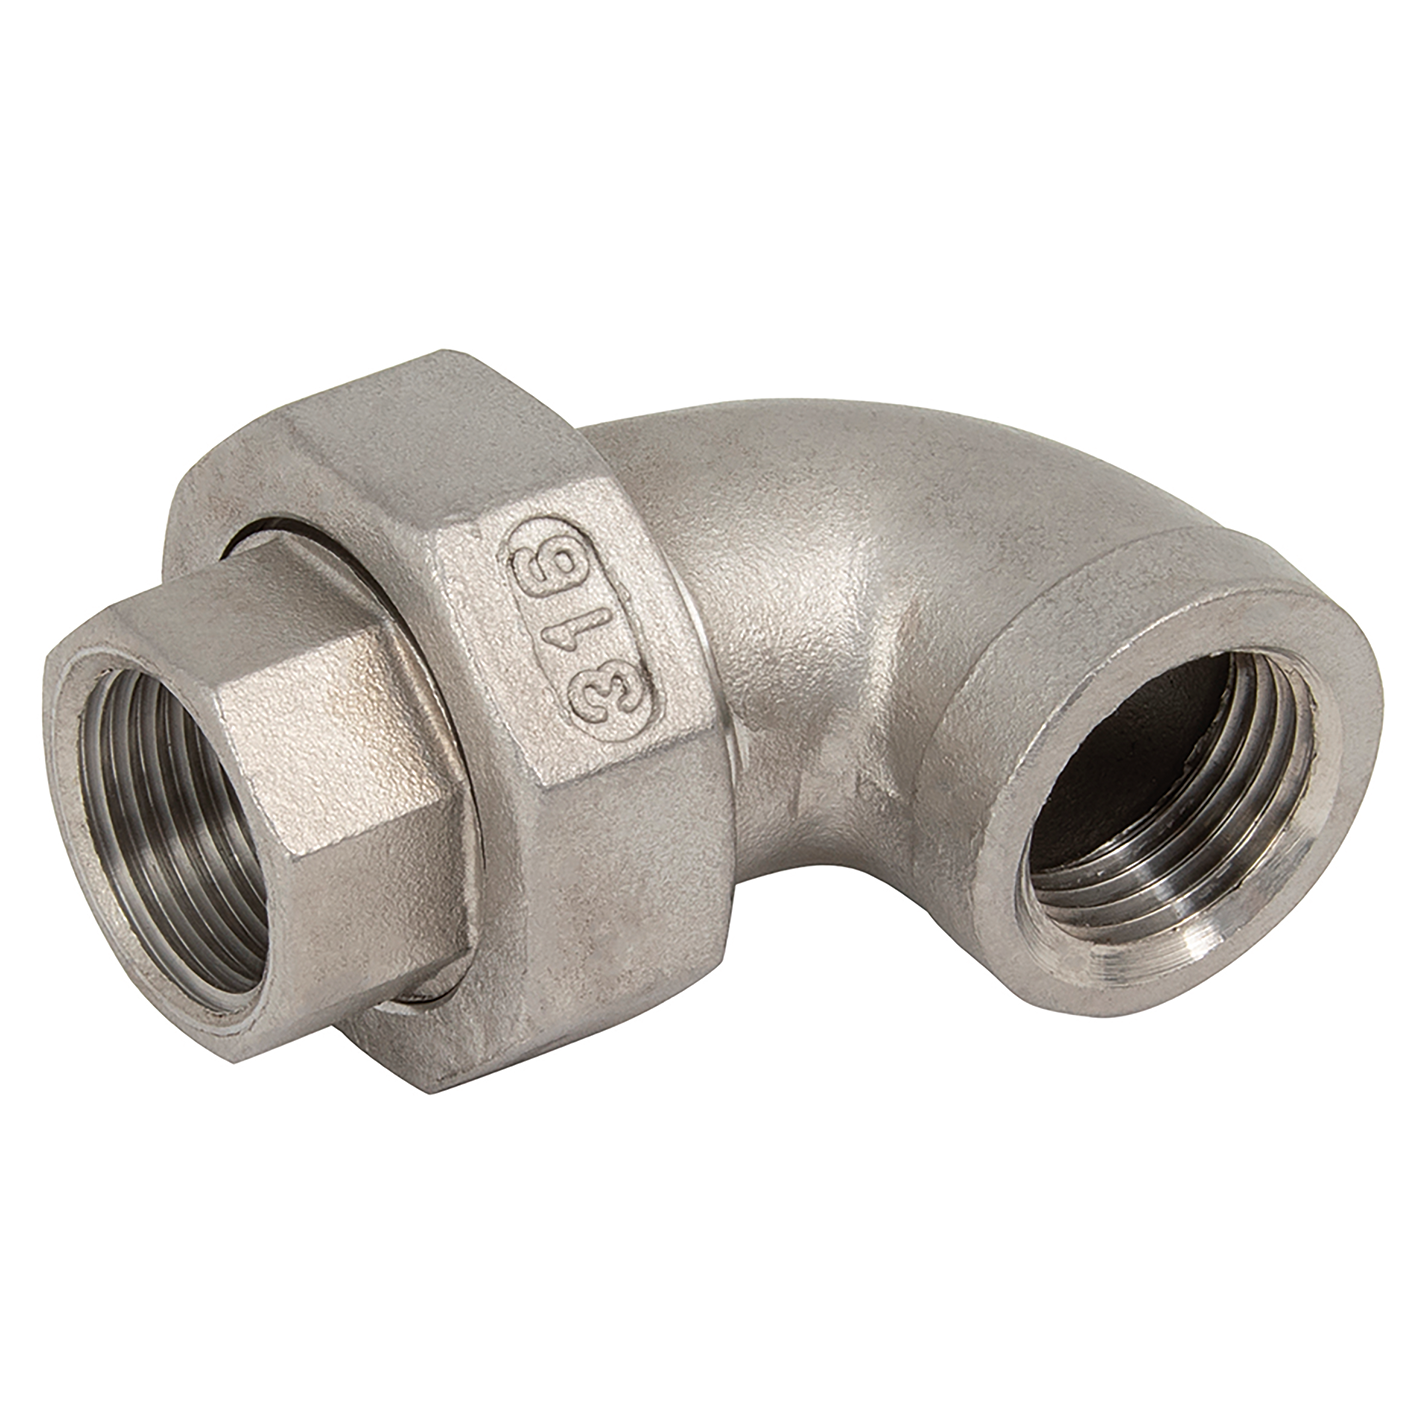 3/4" BSPP FEMALE FLAT UNION ELBOW STAINLESS STEEL